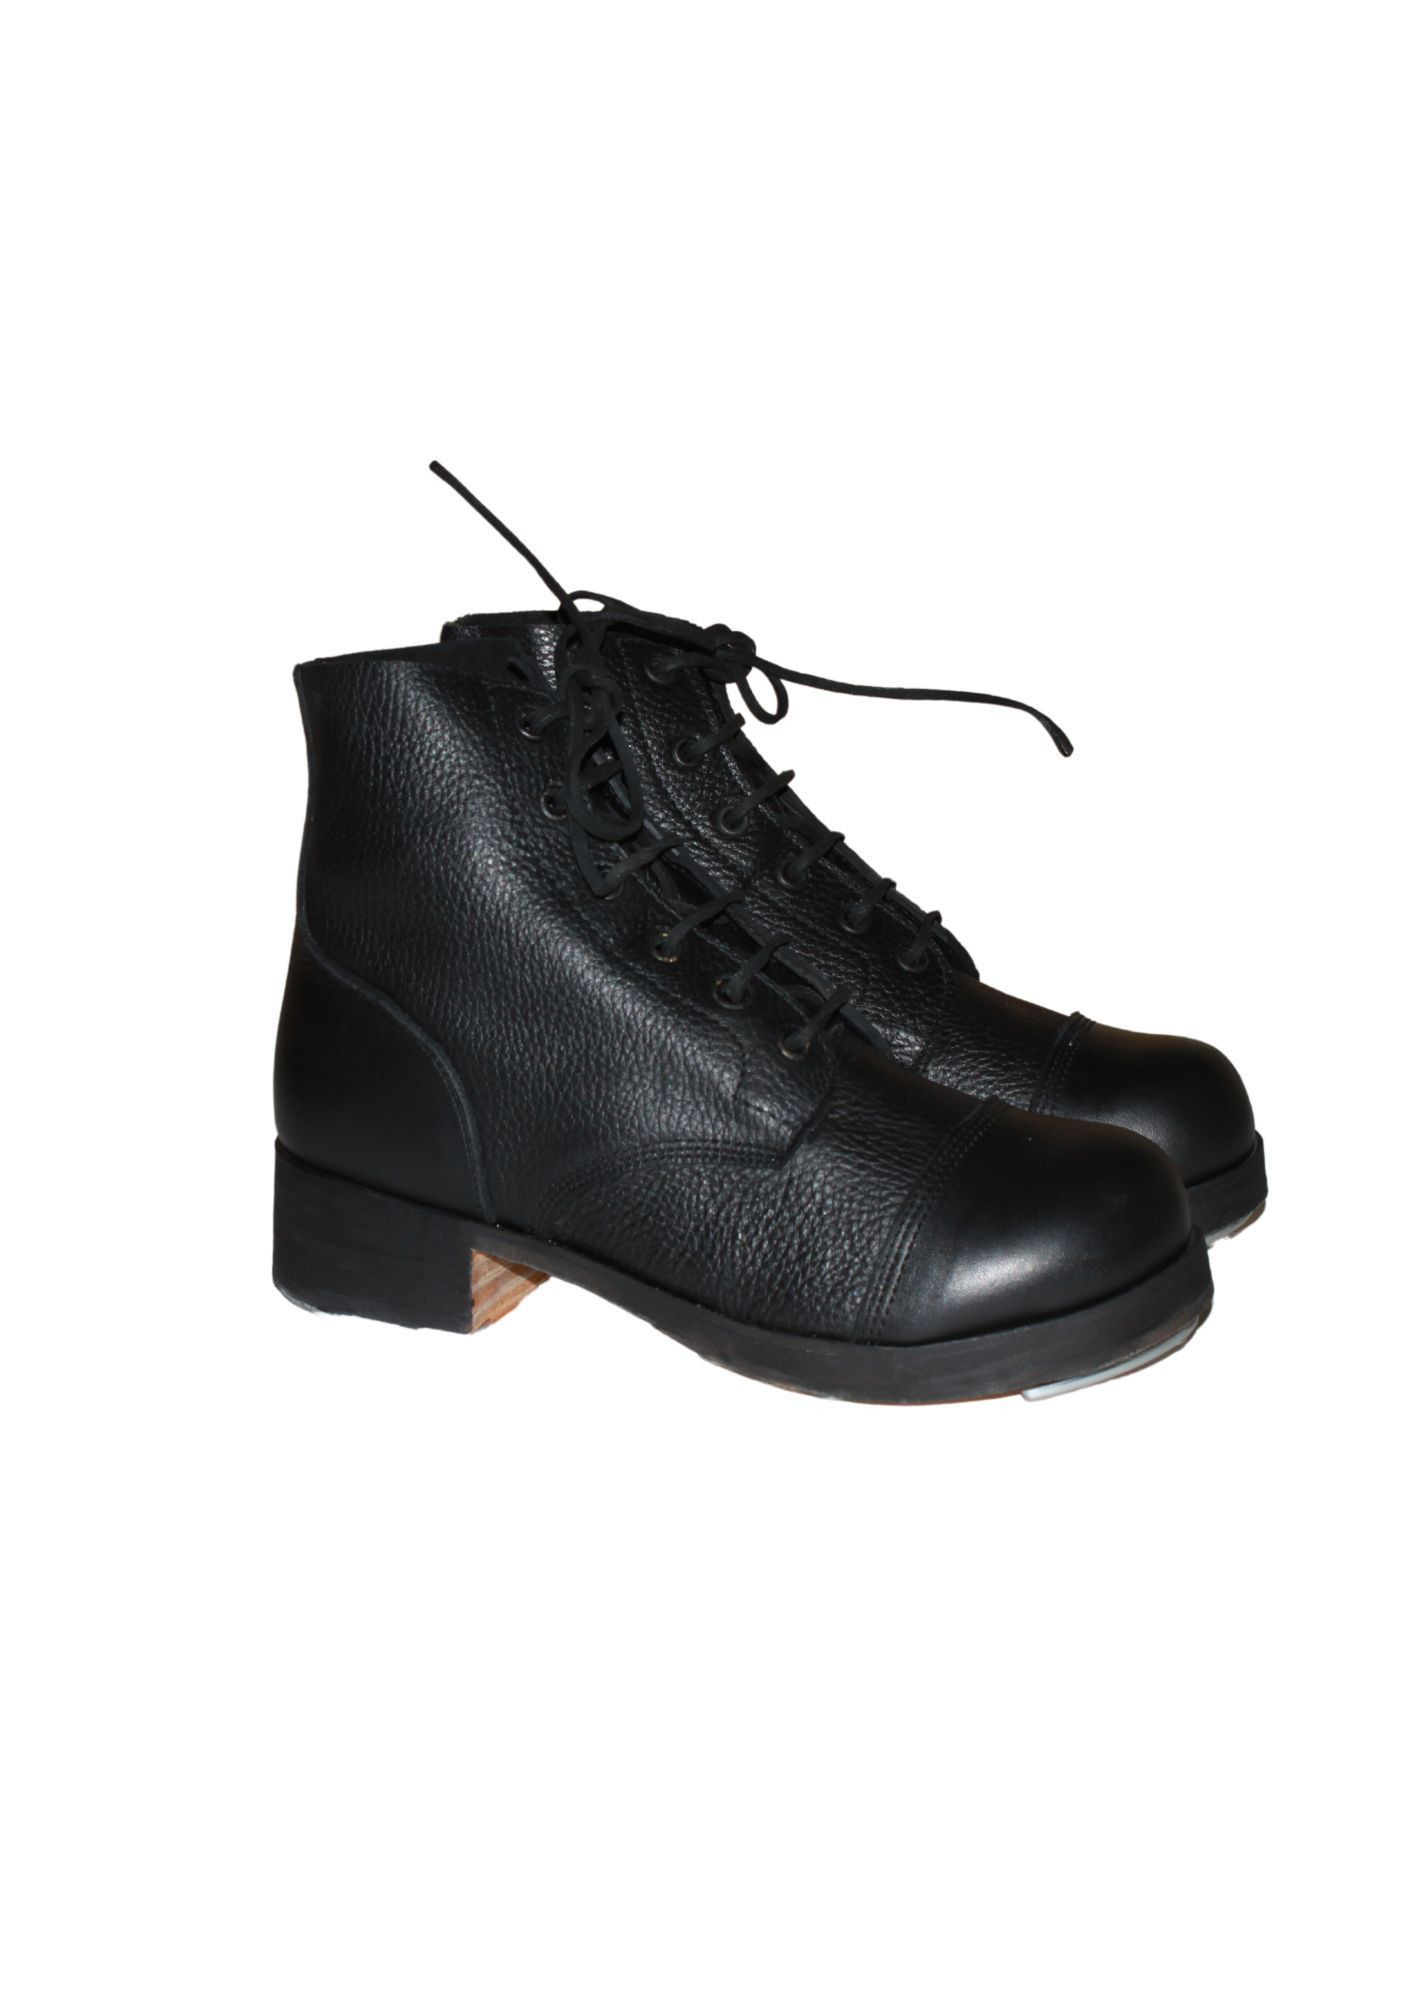 British ww2 army black ammo ankle boots